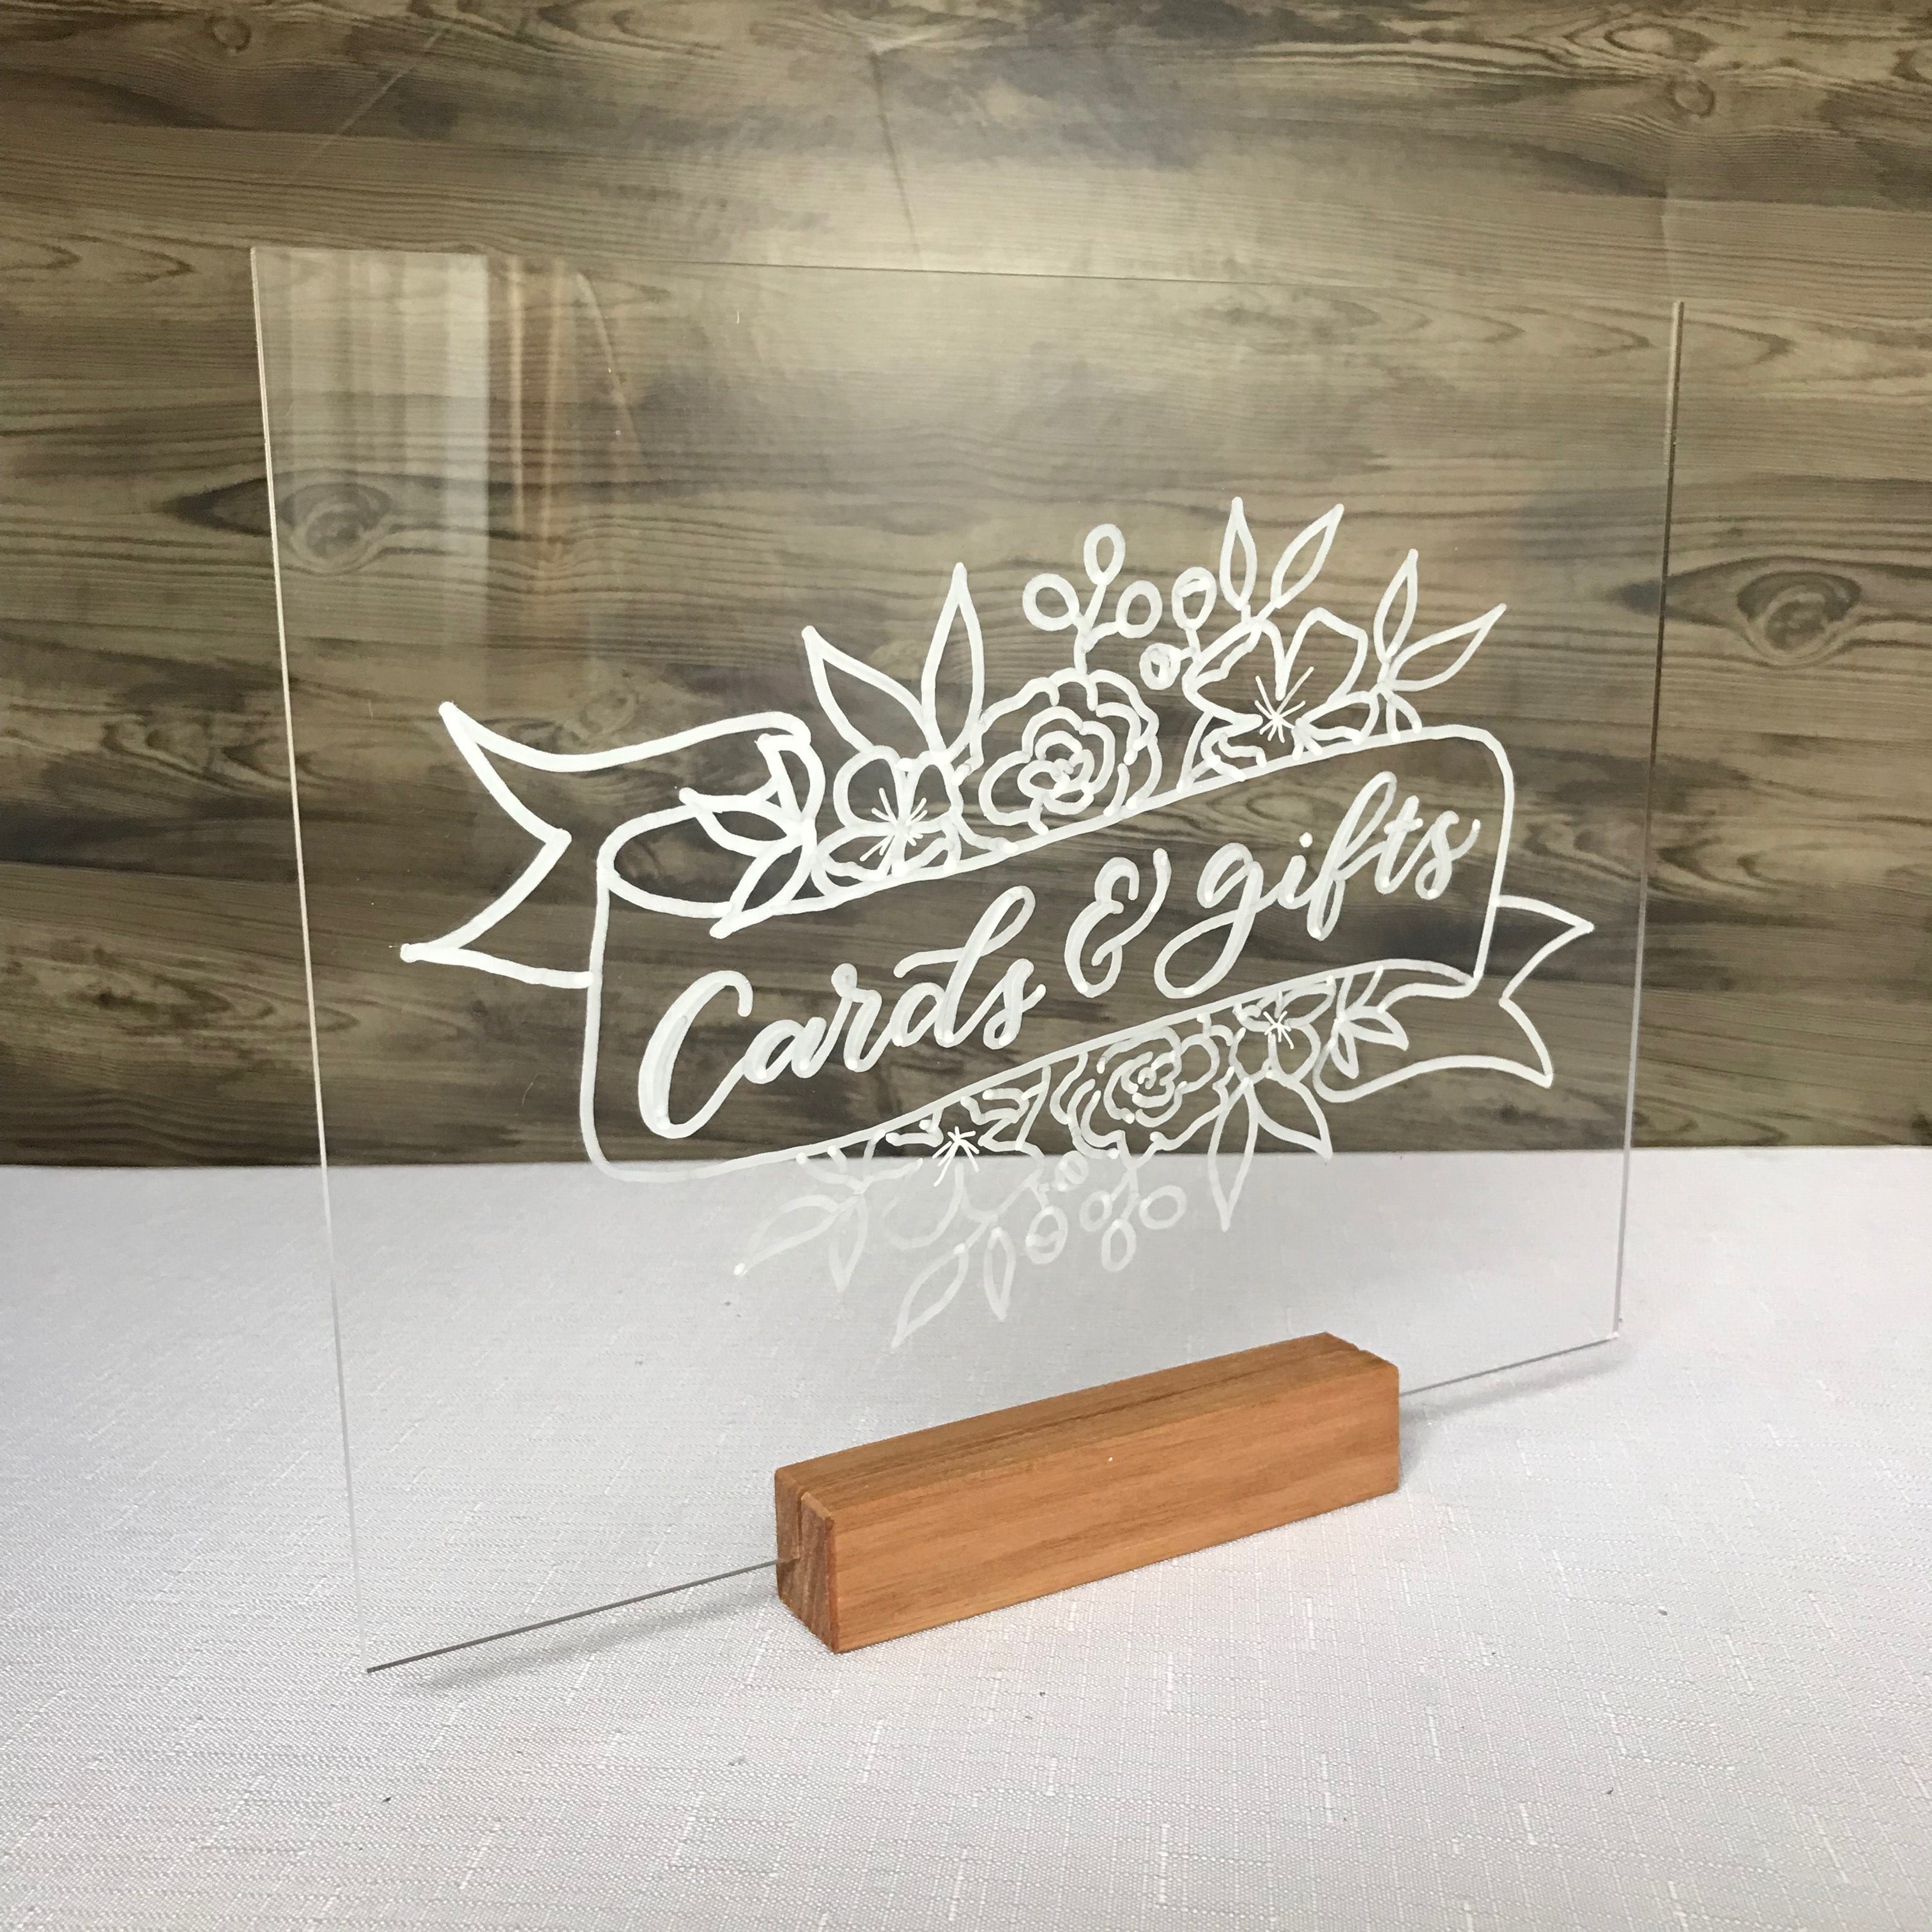 Cards and gifts wedding table sign with calligraphy lettering and flower drawings